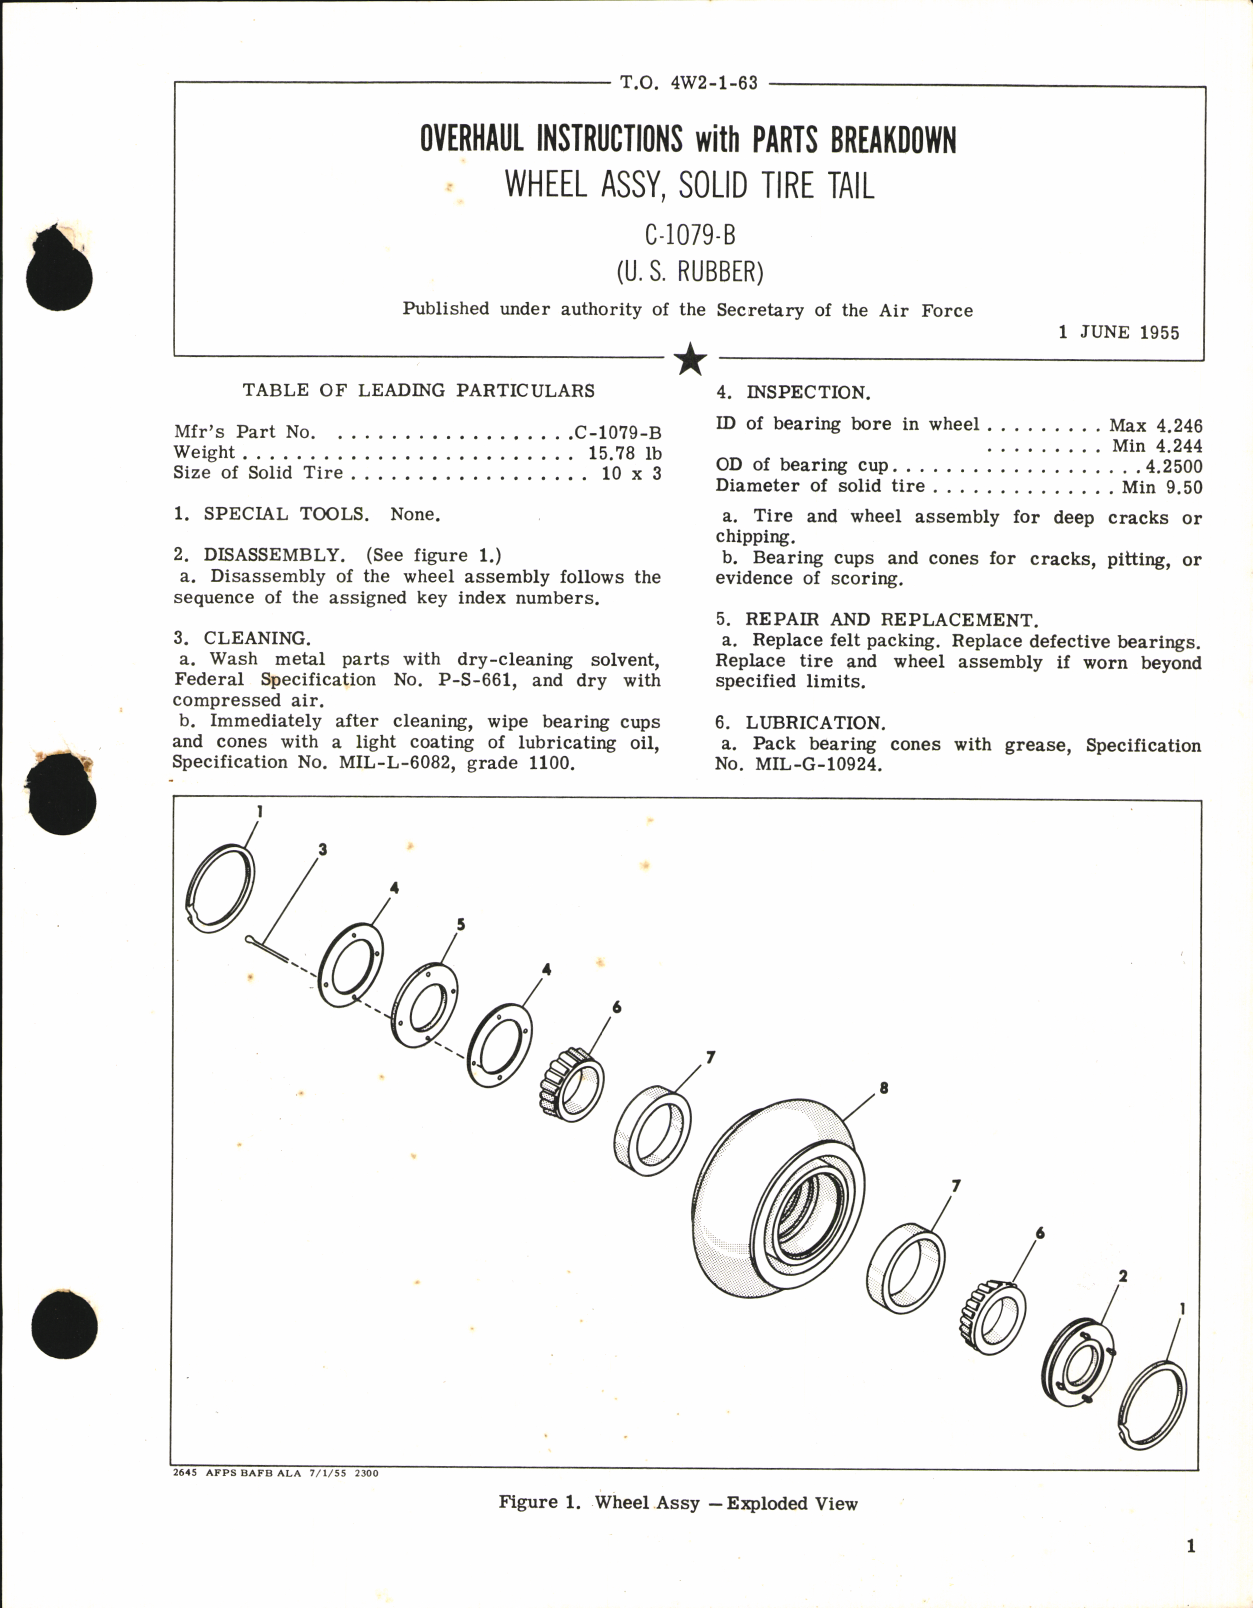 Sample page 1 from AirCorps Library document: Overhaul Instructions with Parts Breakdown for Wheel Assy, Solid Tire Tail